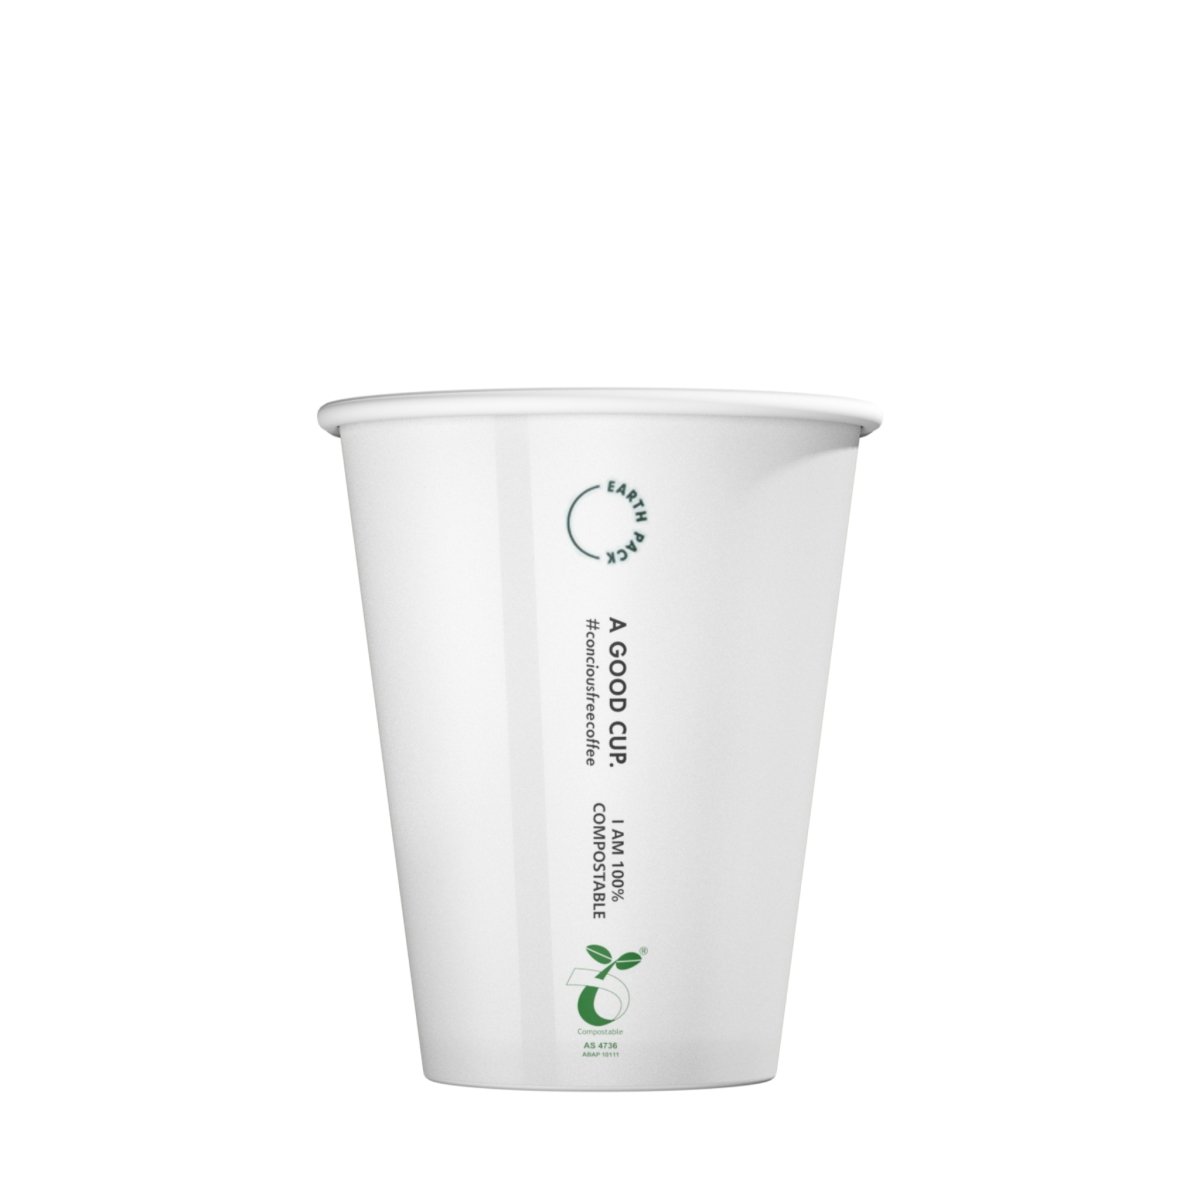 White eco friendly compostable 8oz coffee cup